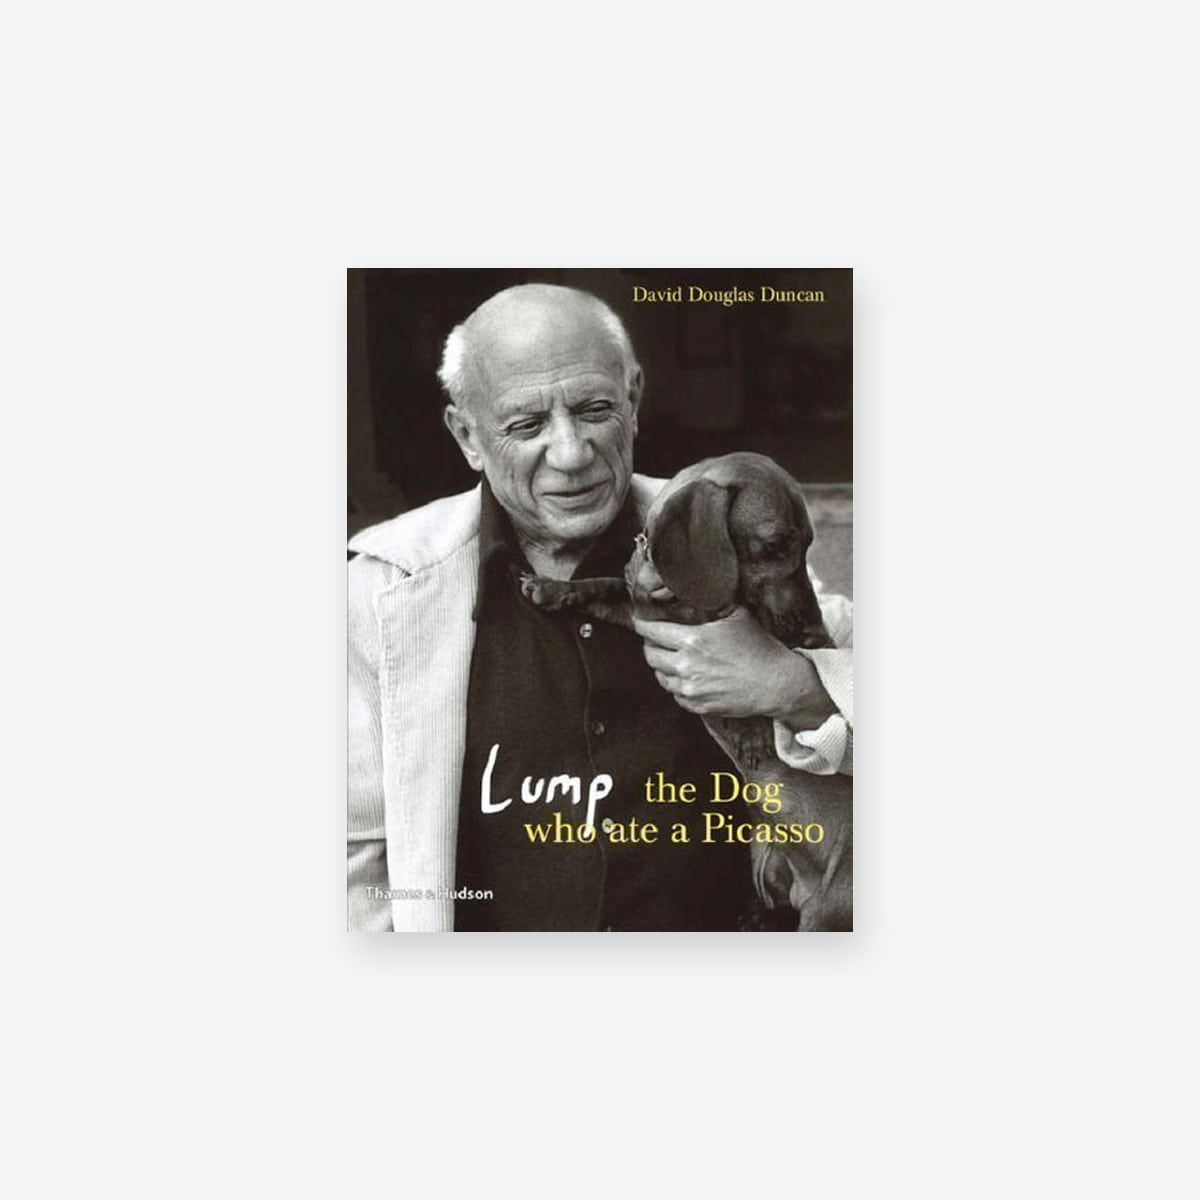 Lump: The Dog who ate a Picasso